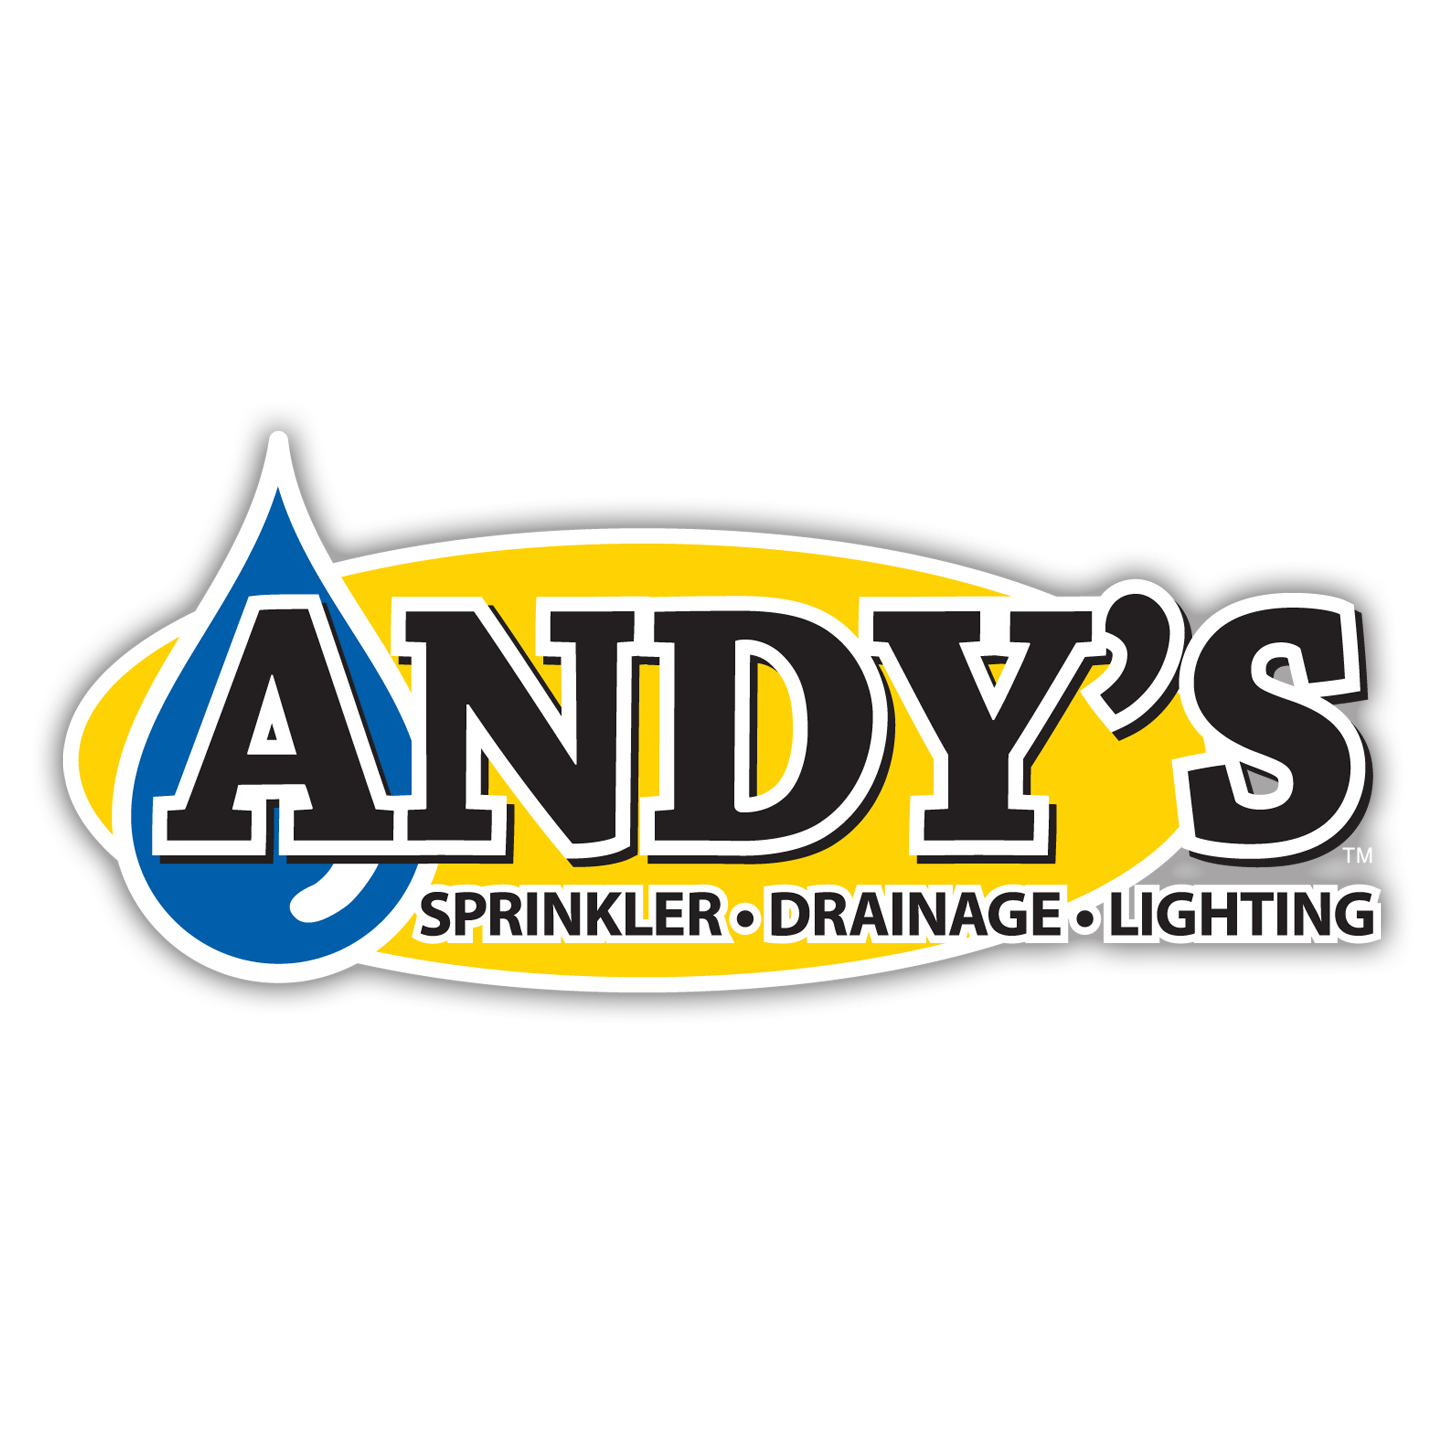 Andy’s Sprinkler, Drainage, and Lighting - Jacksonville, FL 32257-3262 - (844)805-5645 | ShowMeLocal.com